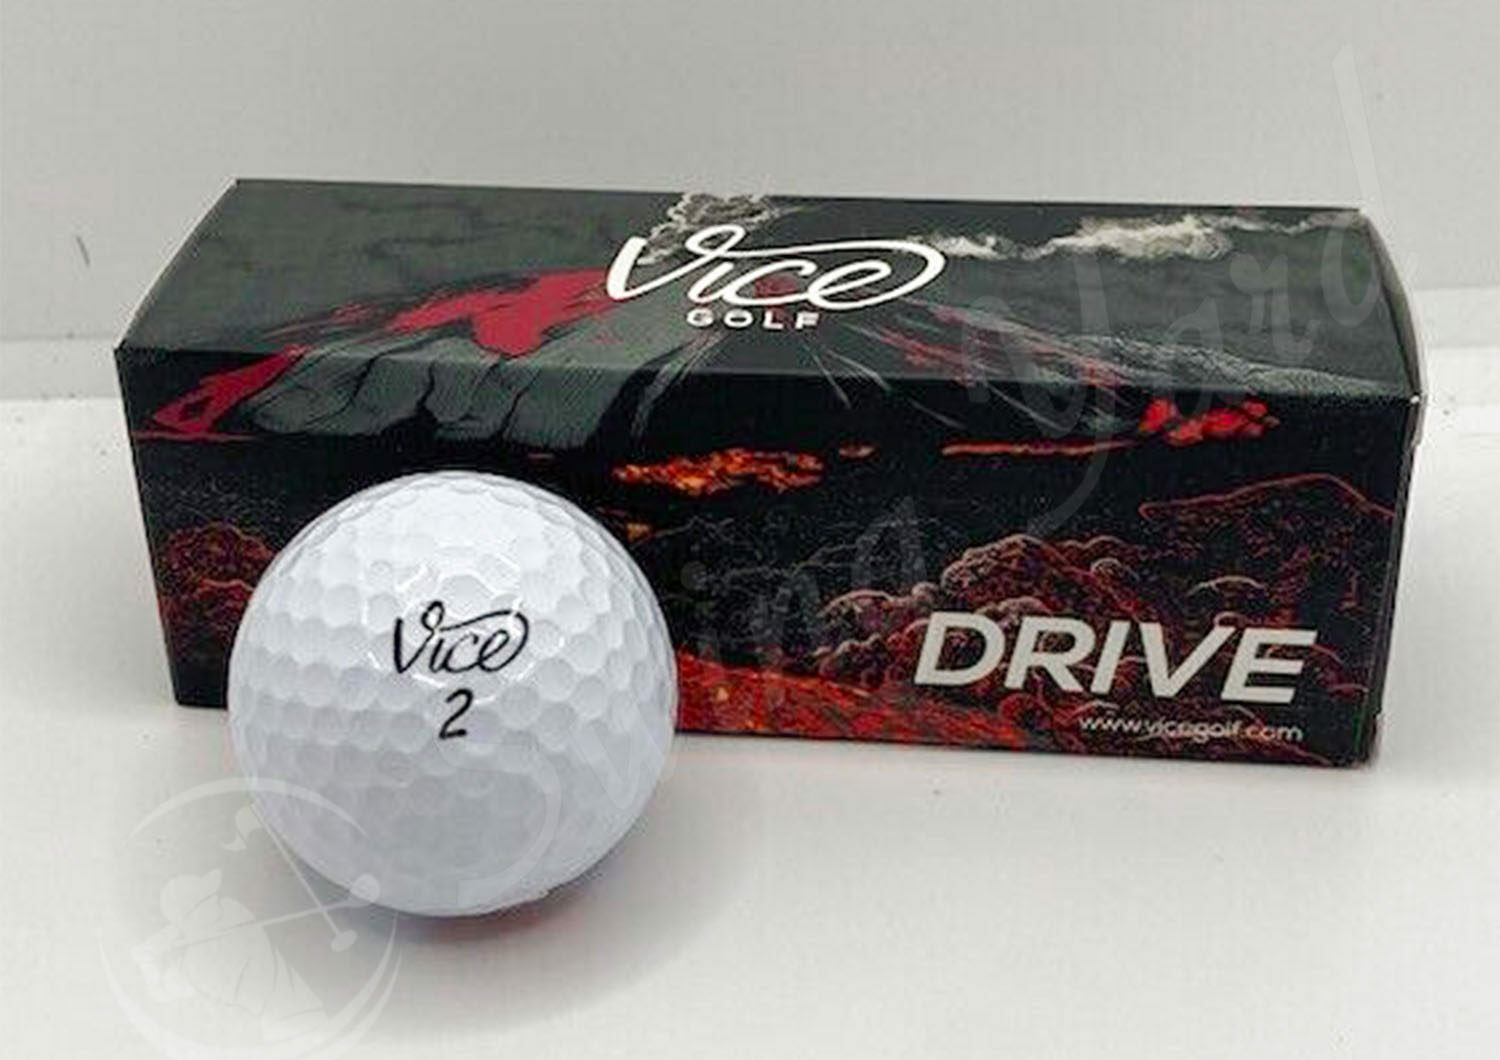 My new Vice Drive number 2 ball at the floor